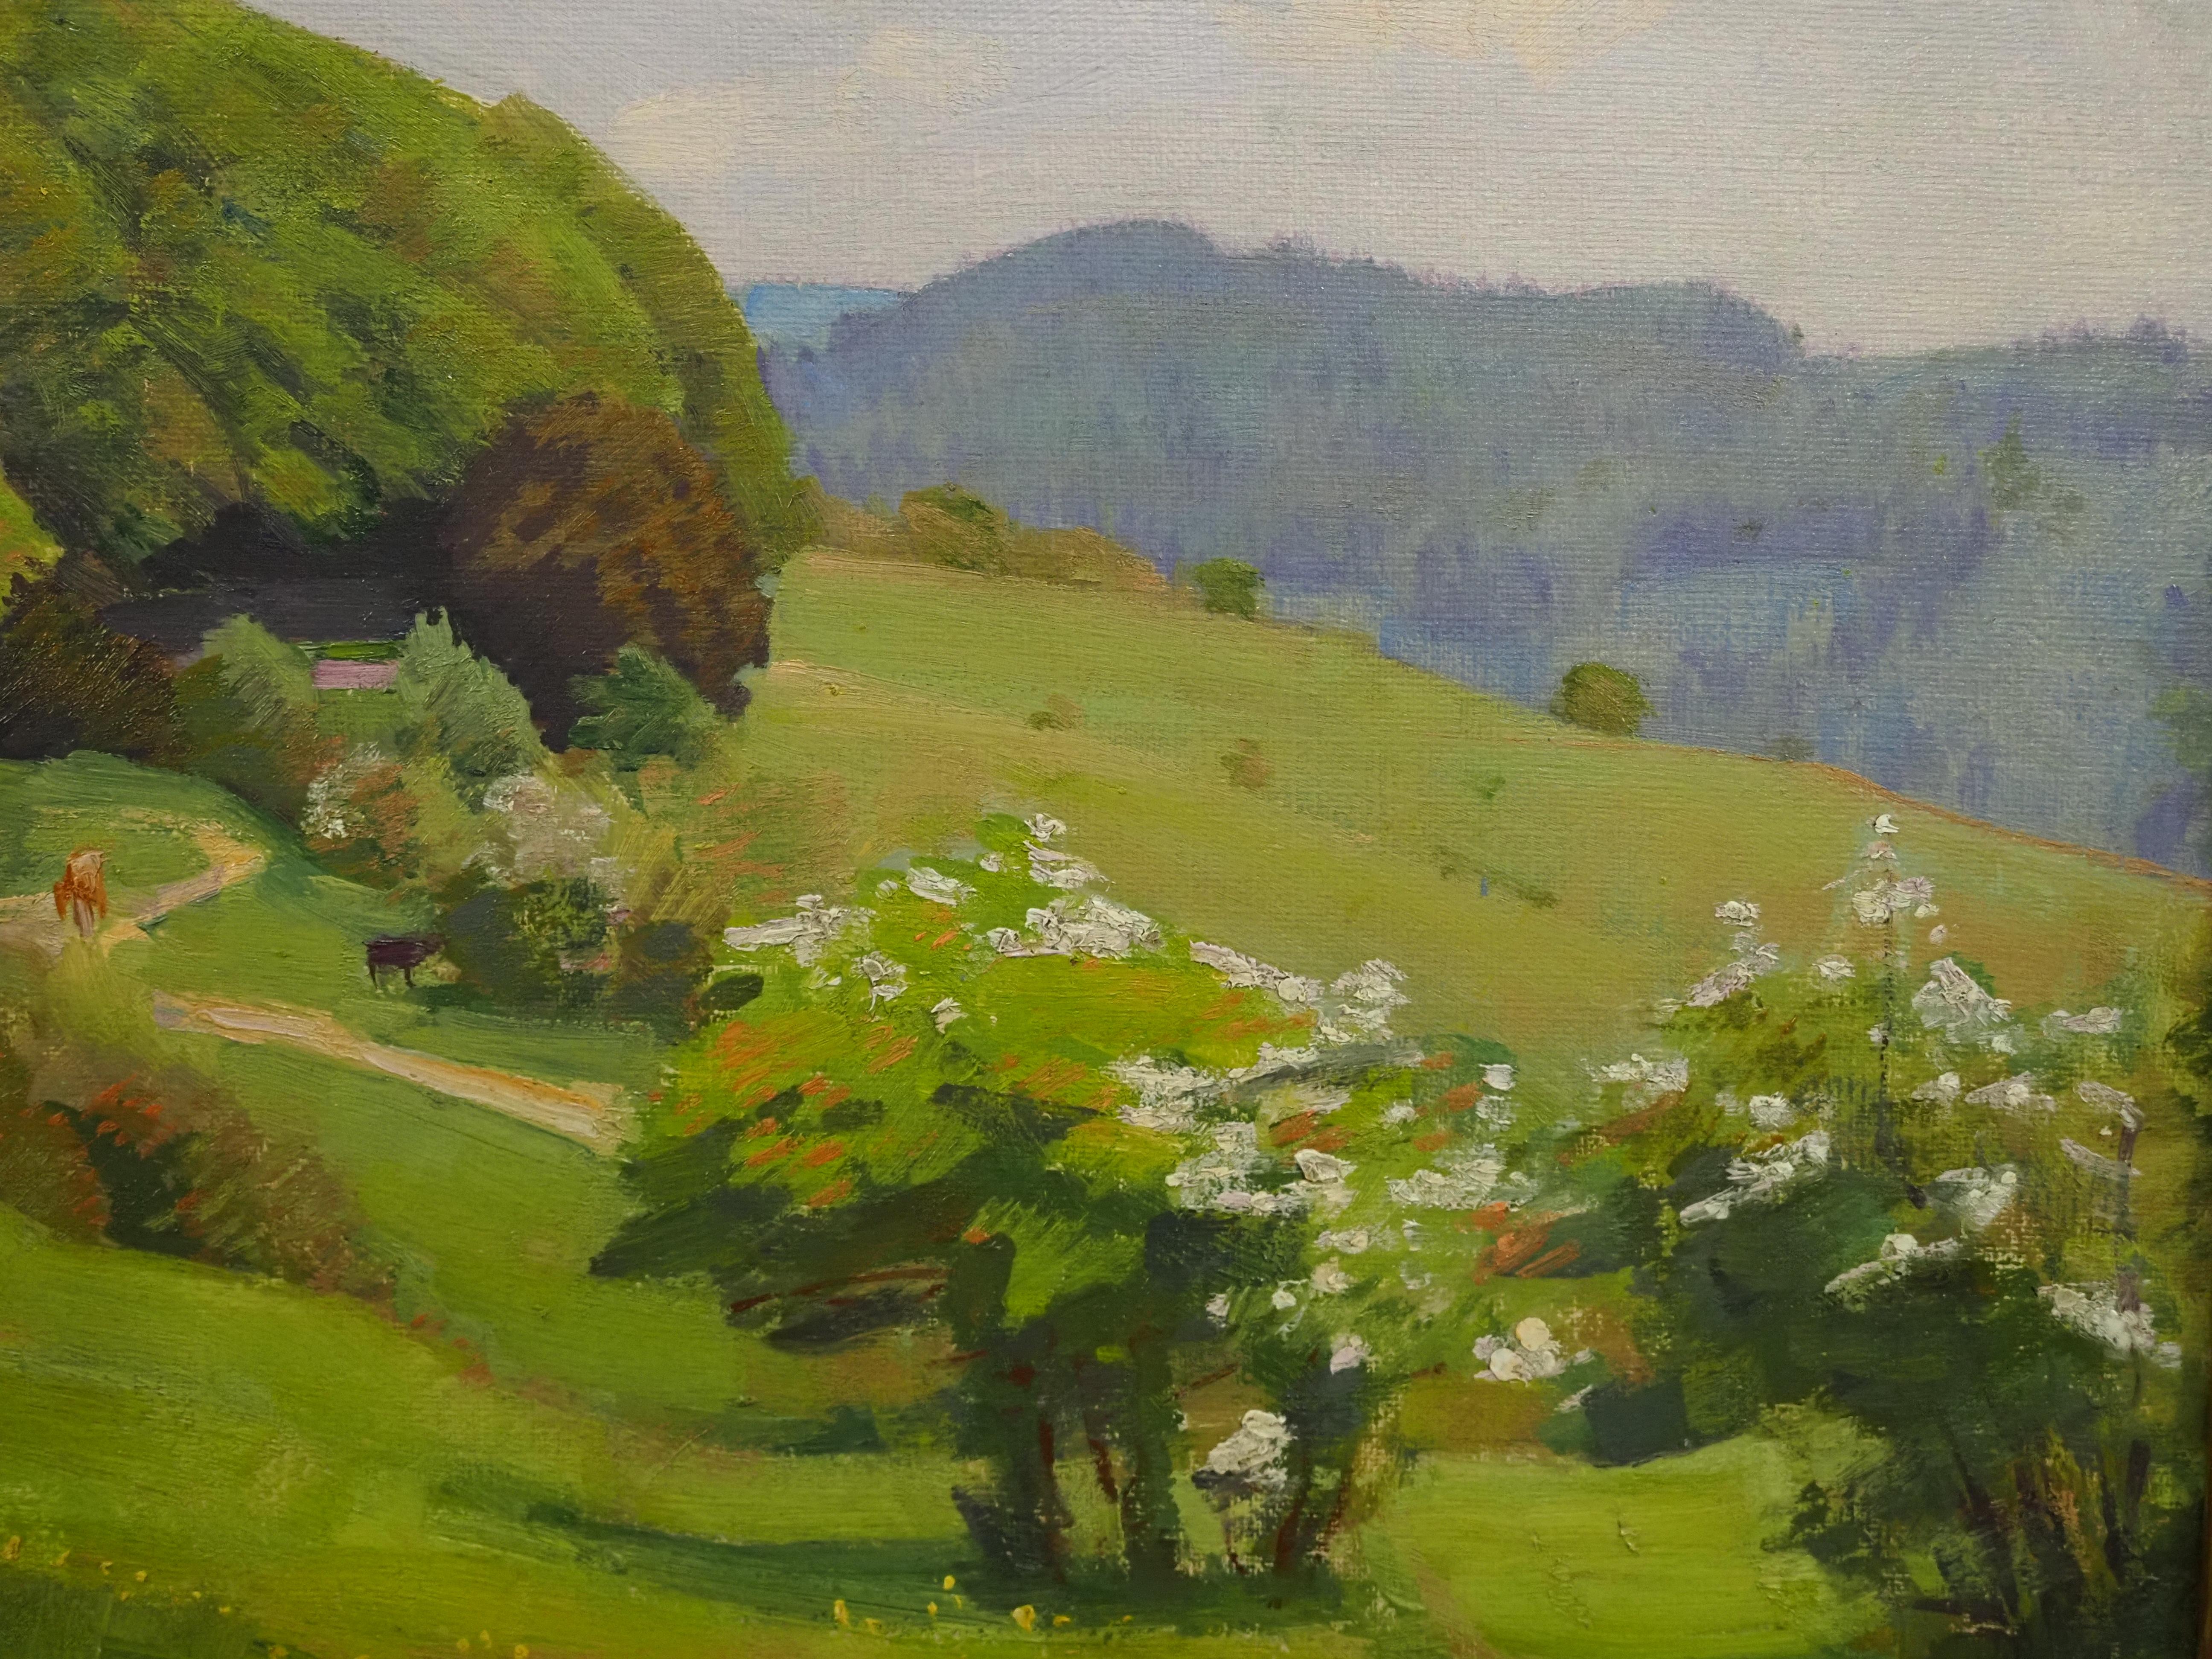 Harold Speed RA, RCA (1872 – 1957)
Landscape in Spring
Oil on paper
Painting Size - 12 x 16 in
Framed Size - 15 x 19 in

Born in London, Harold Speed was the son of an architect, Edward Speed. Following in the path of his father he began studies in